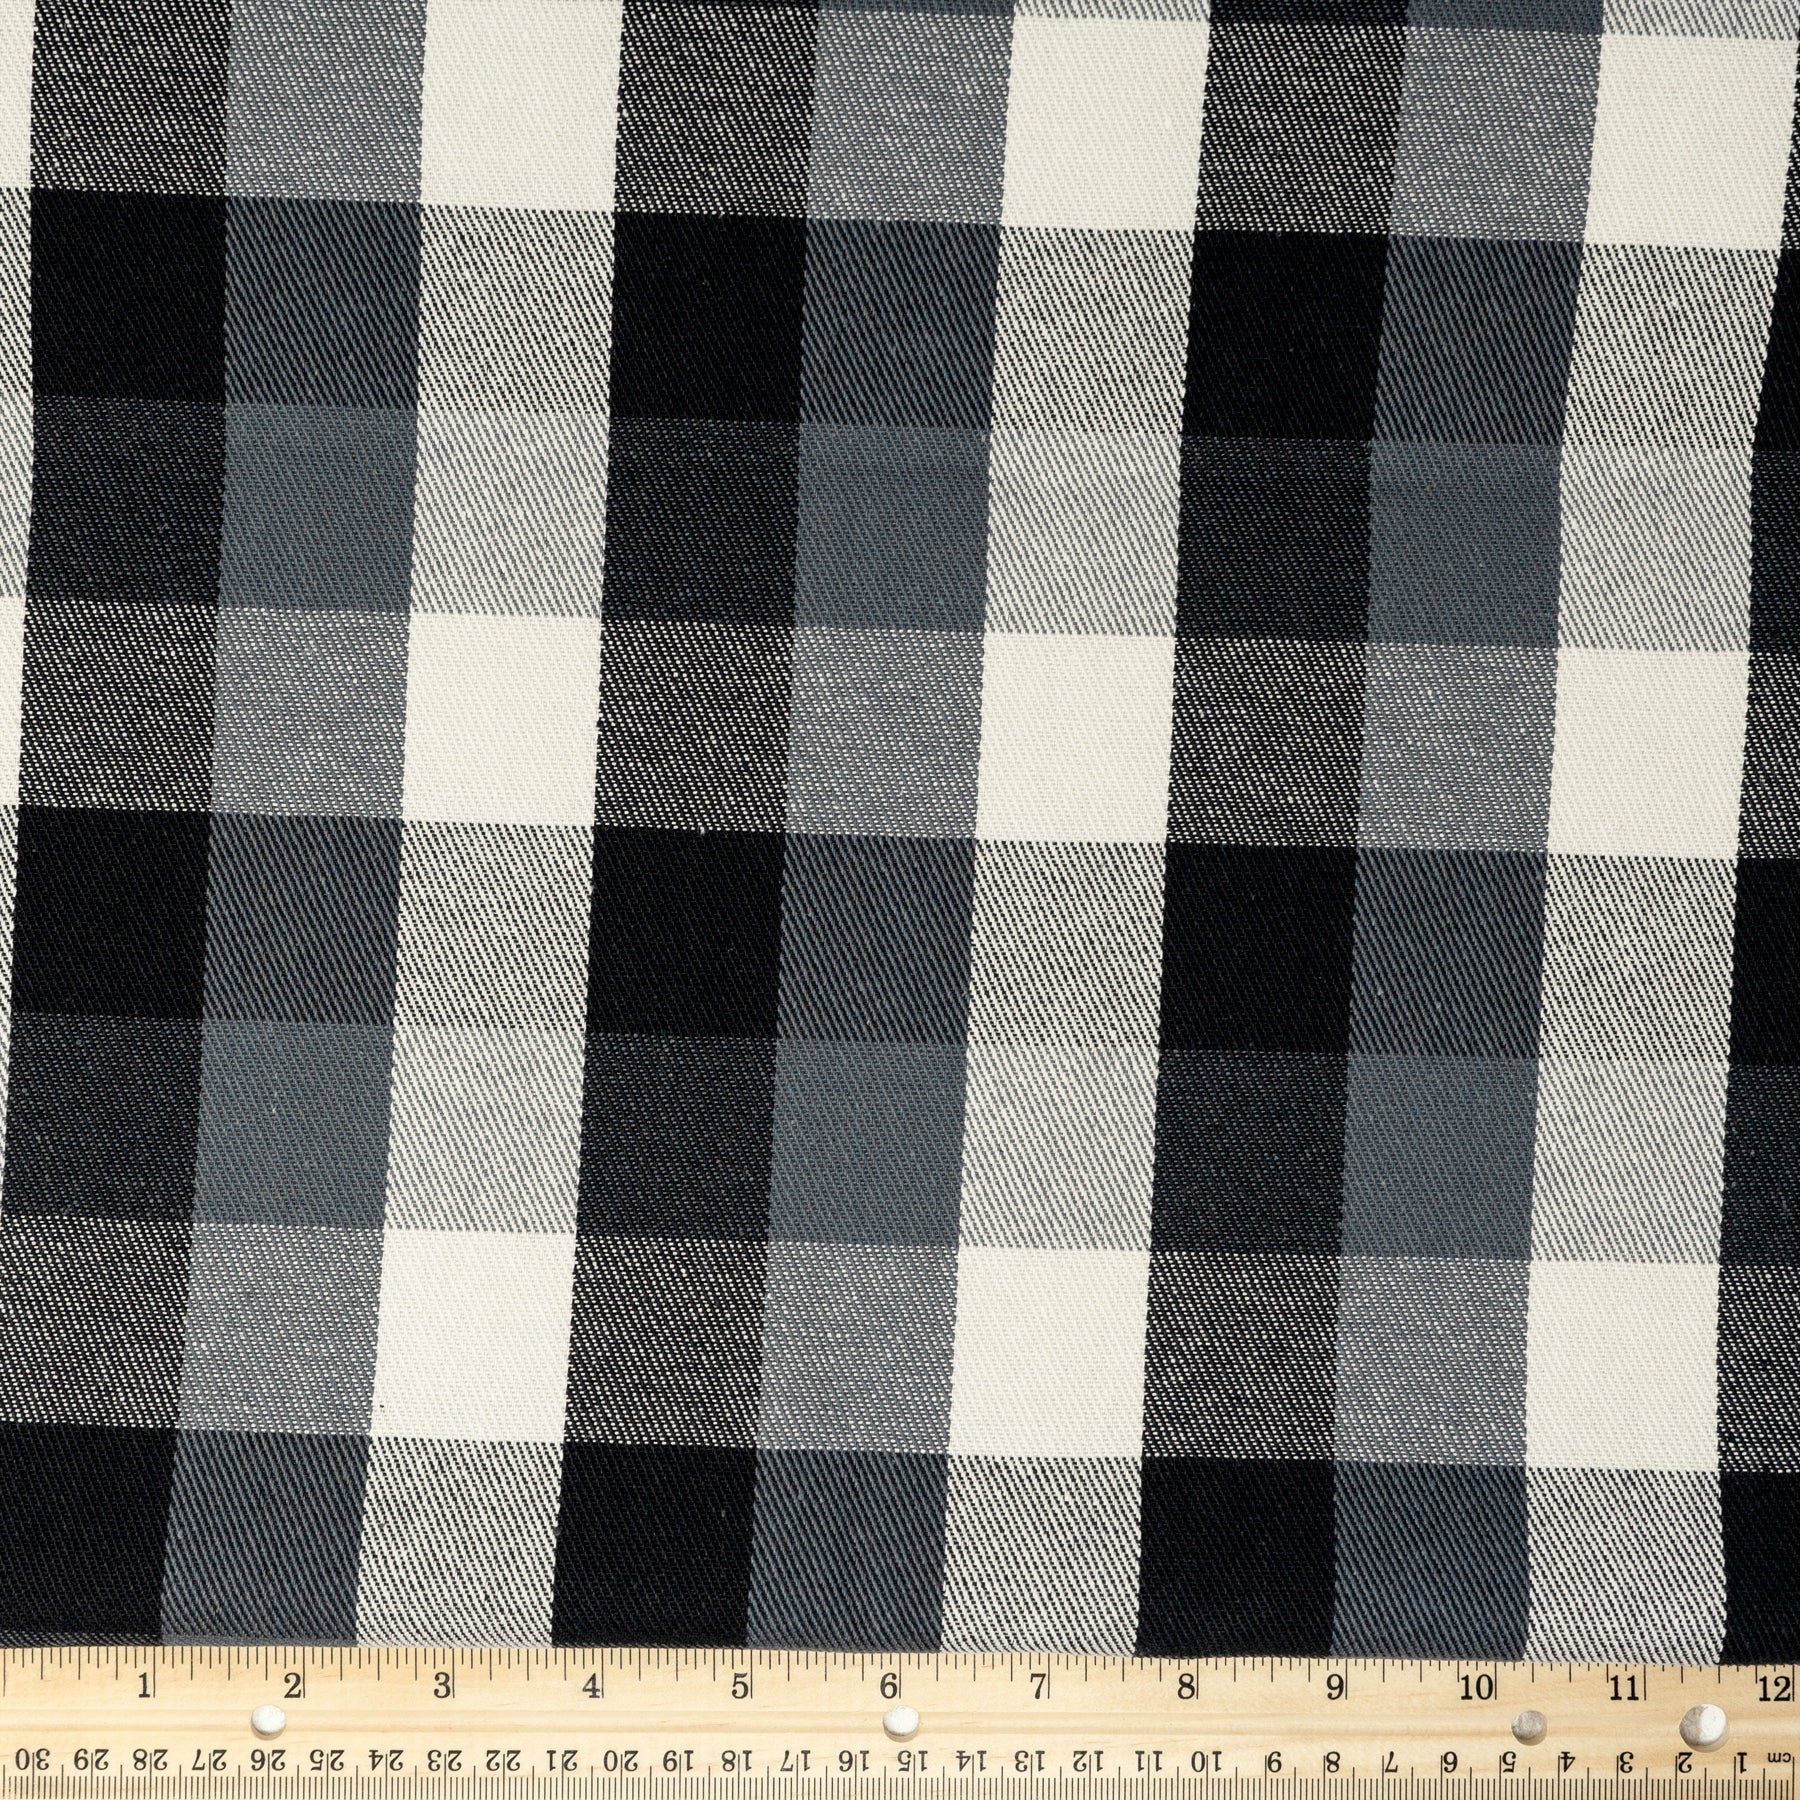 Waverly Inspirations 100% Cotton Duck 54" Twill Plaid Black Color Sewing Fabric by the Yard